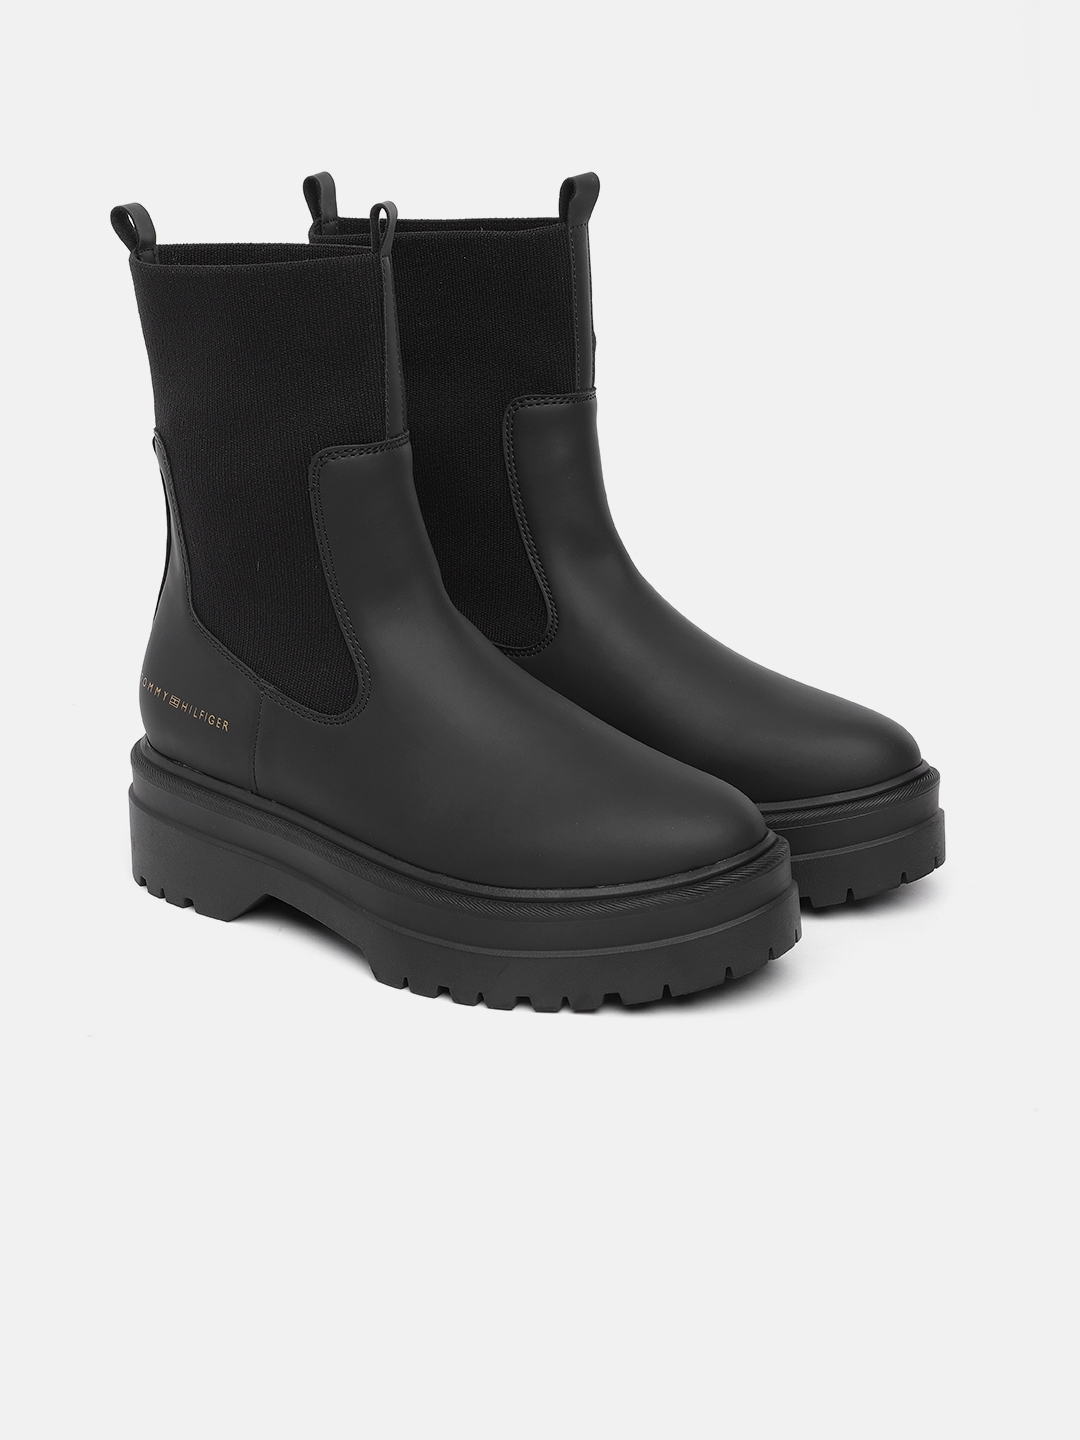 Buy Tommy Hilfiger Women Solid High Top Platform Rainboot Style Chunky ...